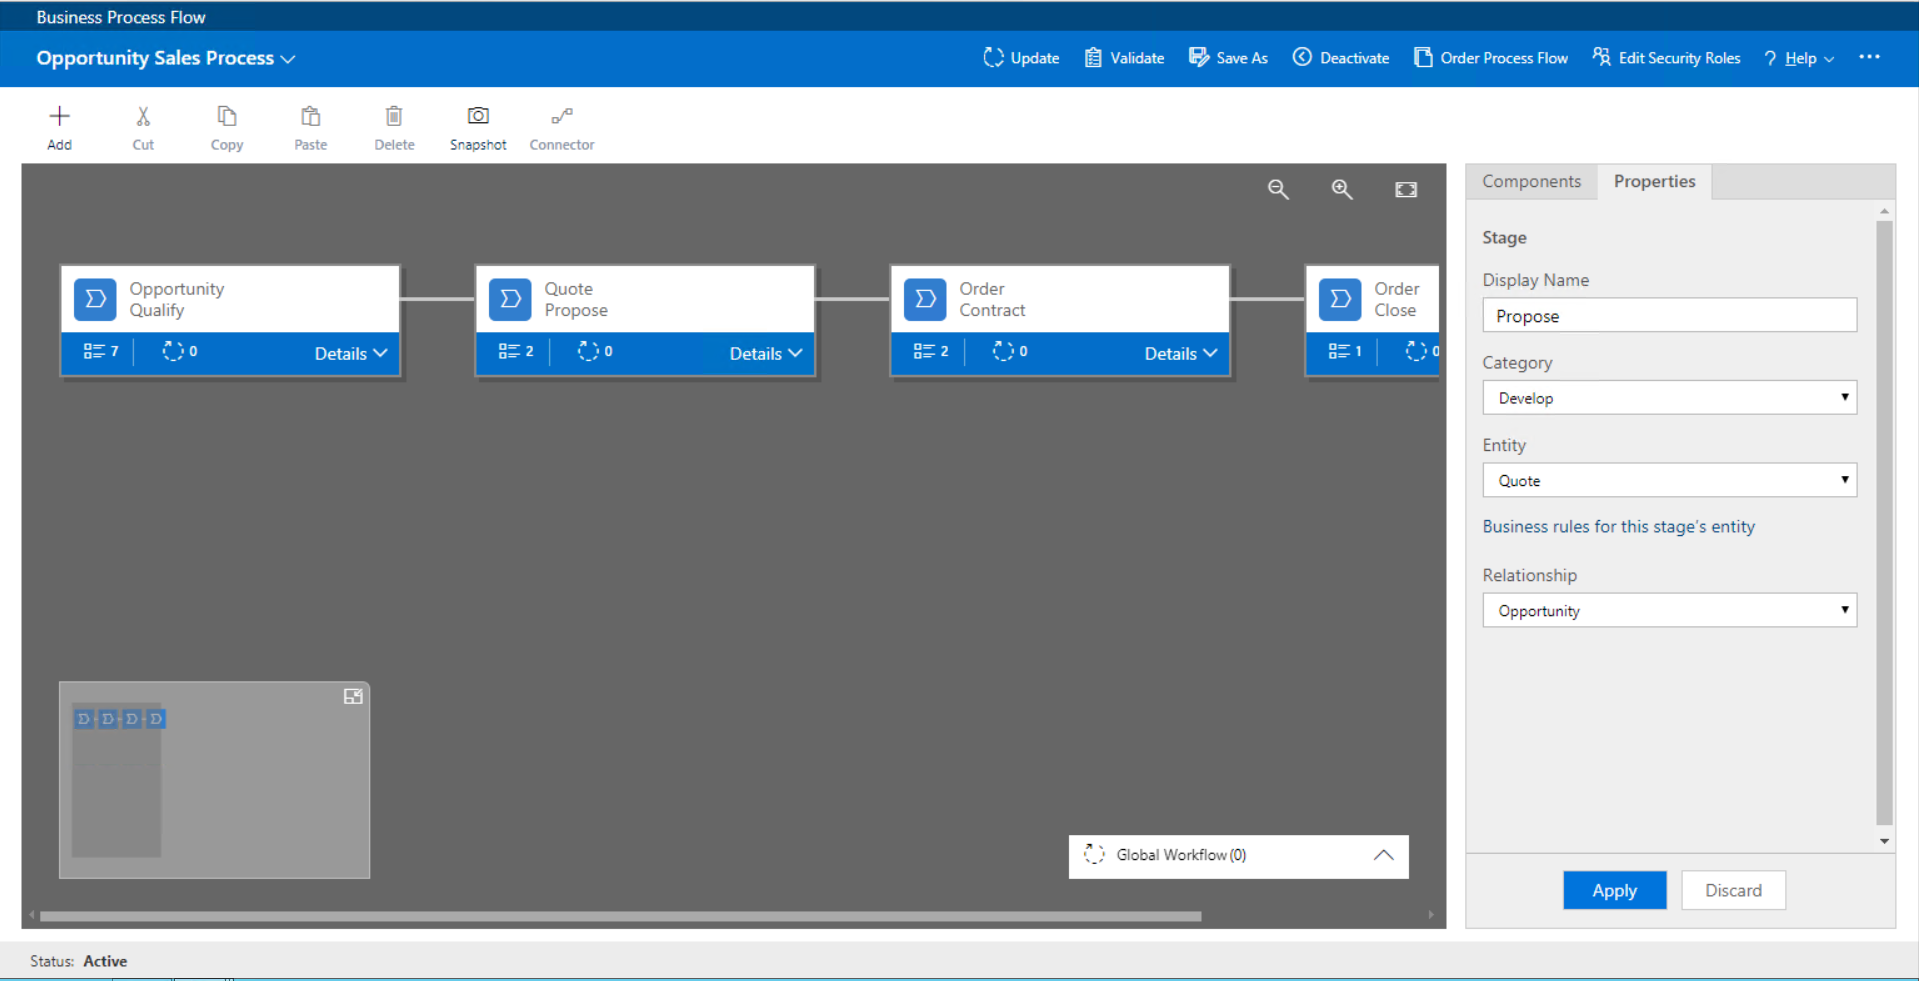 Business process configuration in Dynamics 365.